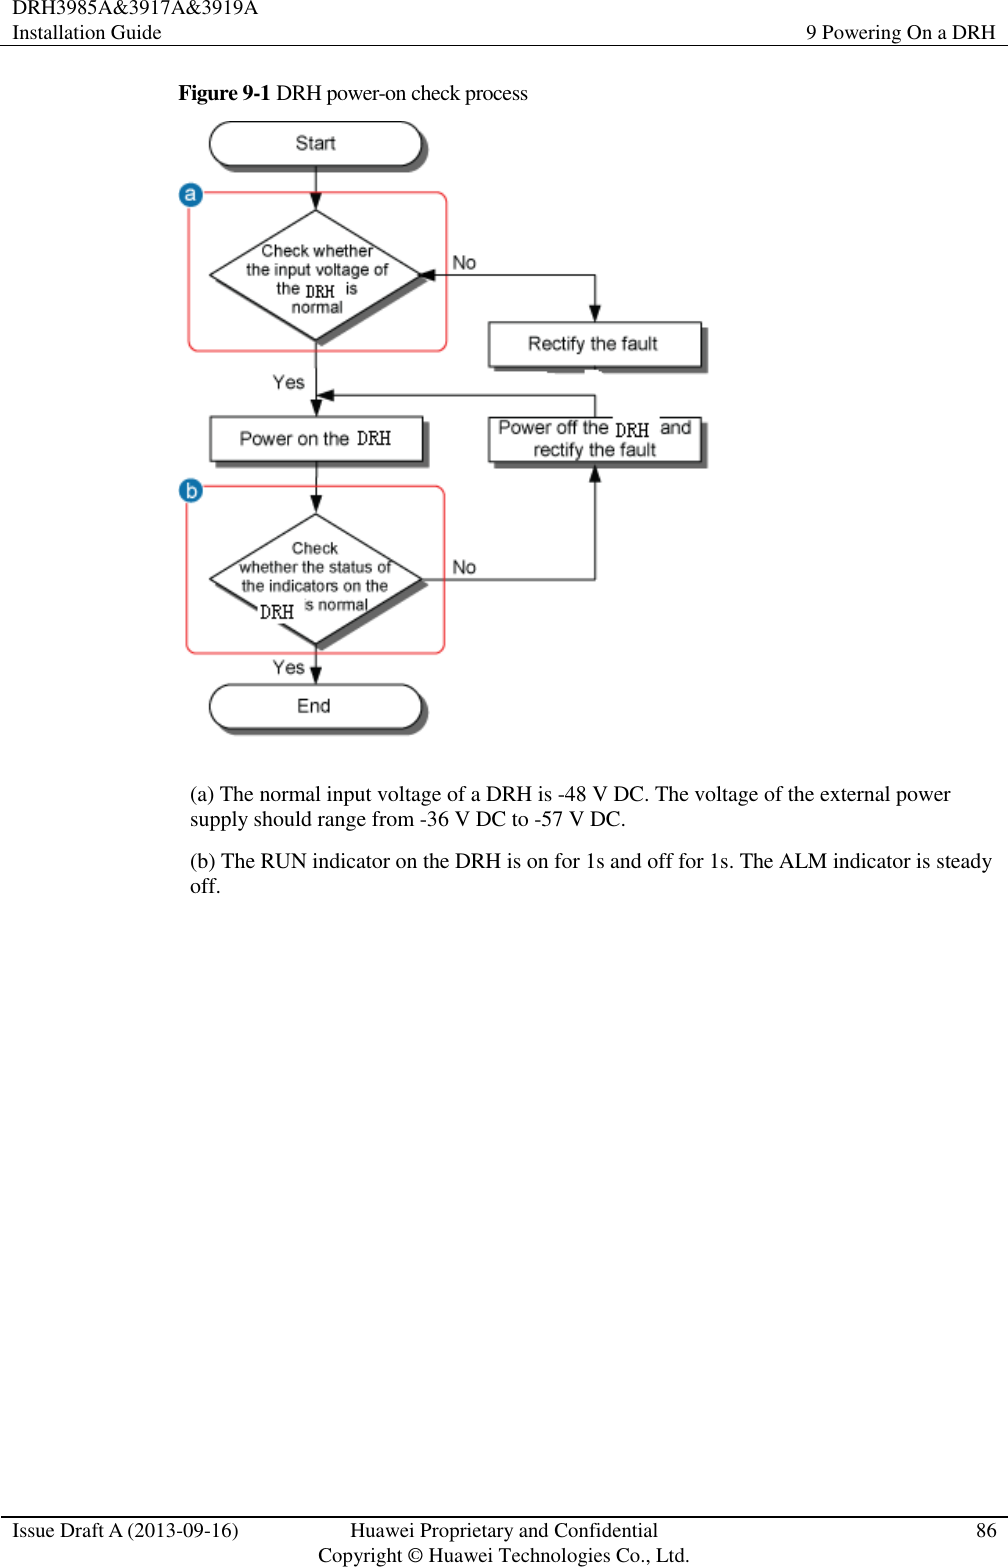 DRH3985A&amp;3917A&amp;3919A Installation Guide 9 Powering On a DRH  Issue Draft A (2013-09-16) Huawei Proprietary and Confidential                                     Copyright © Huawei Technologies Co., Ltd. 86  Figure 9-1 DRH power-on check process  (a) The normal input voltage of a DRH is -48 V DC. The voltage of the external power supply should range from -36 V DC to -57 V DC. (b) The RUN indicator on the DRH is on for 1s and off for 1s. The ALM indicator is steady off.  